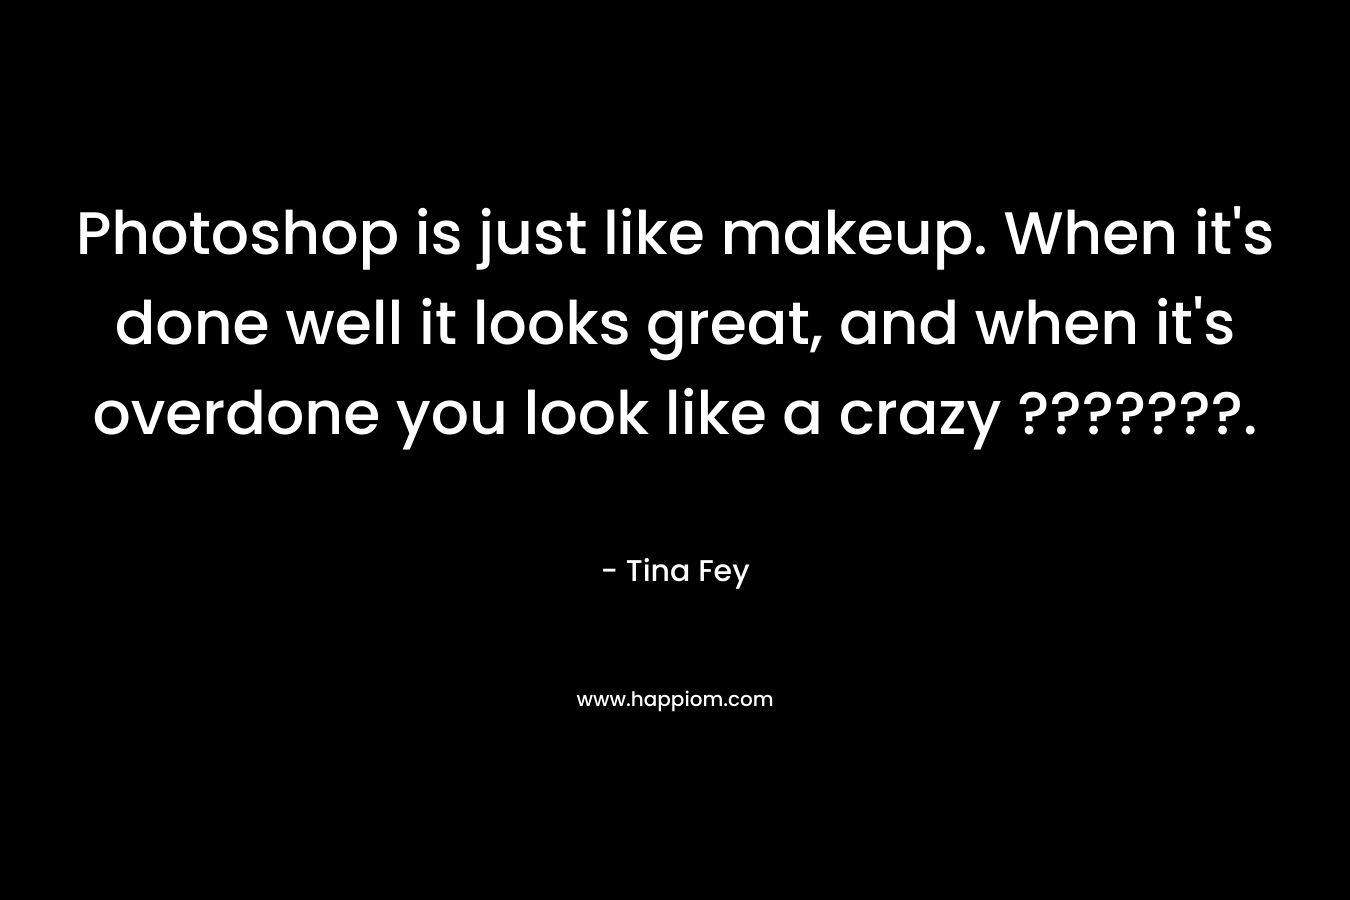 Photoshop is just like makeup. When it’s done well it looks great, and when it’s overdone you look like a crazy ???????. – Tina Fey